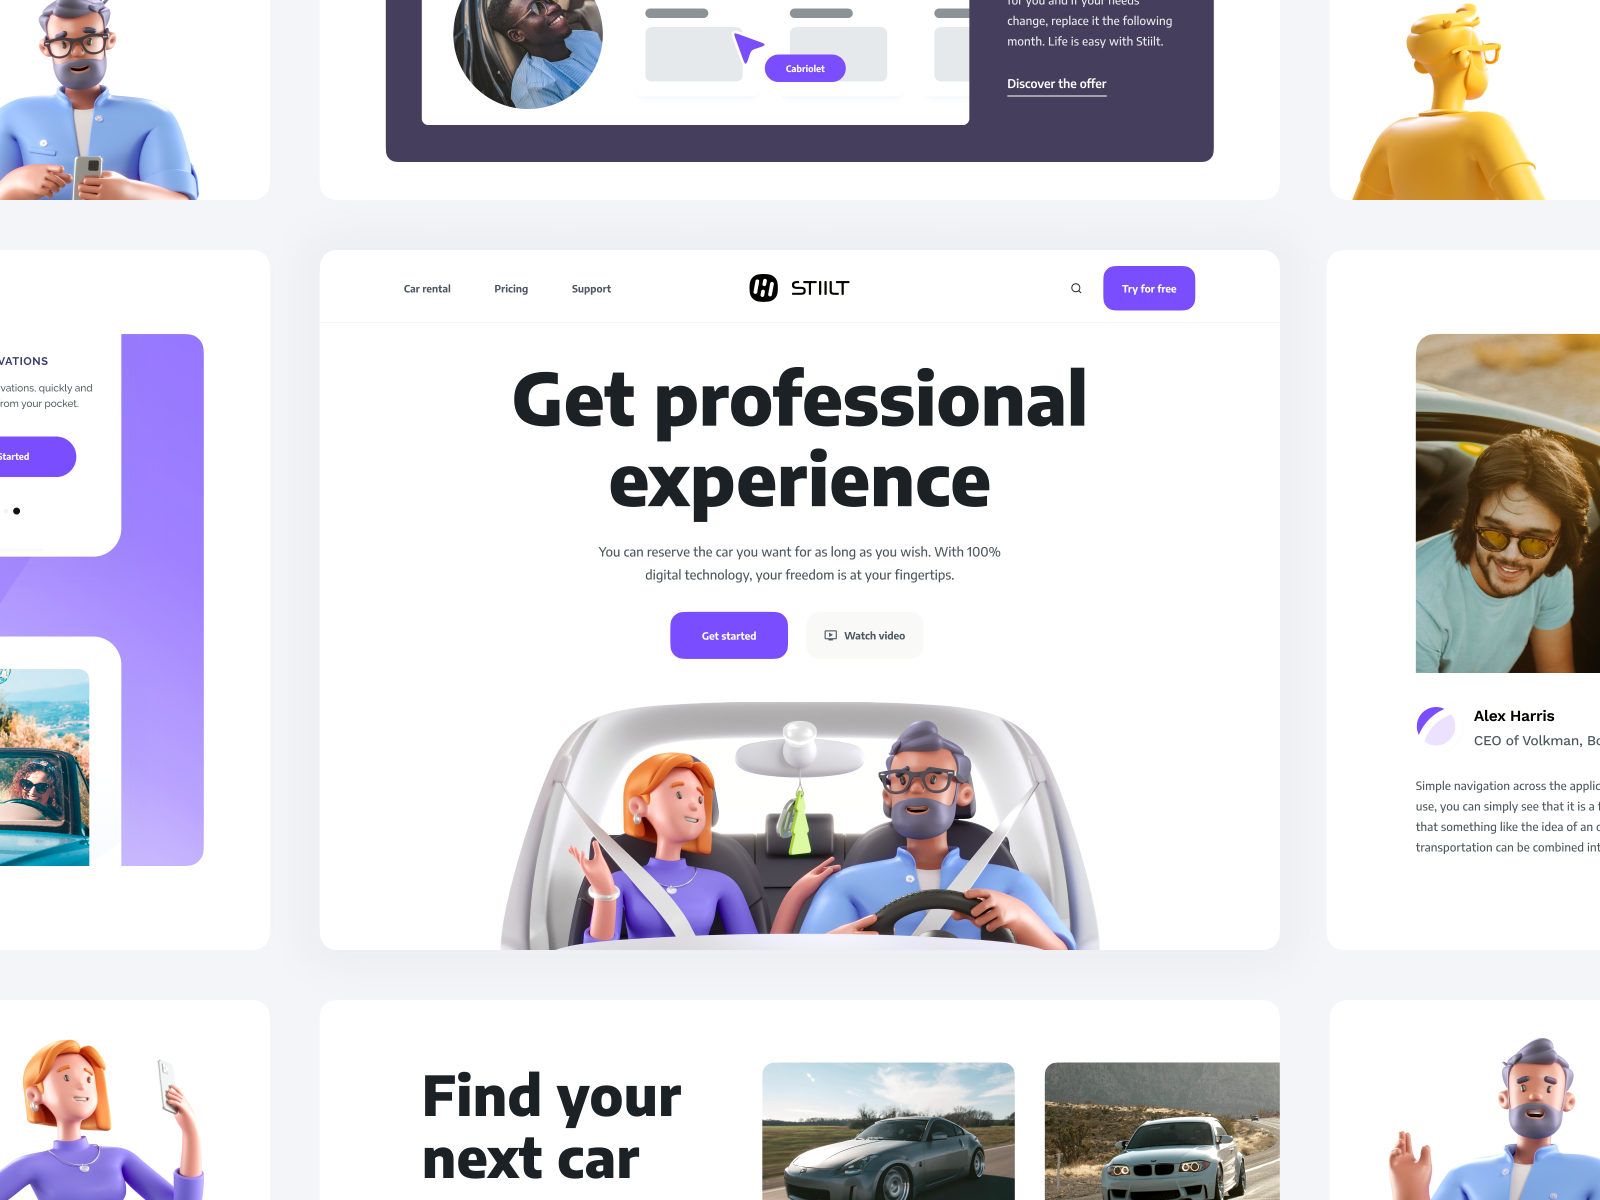 car-rental-website-by-pawe-potera-a-for-10clouds-on-dribbble